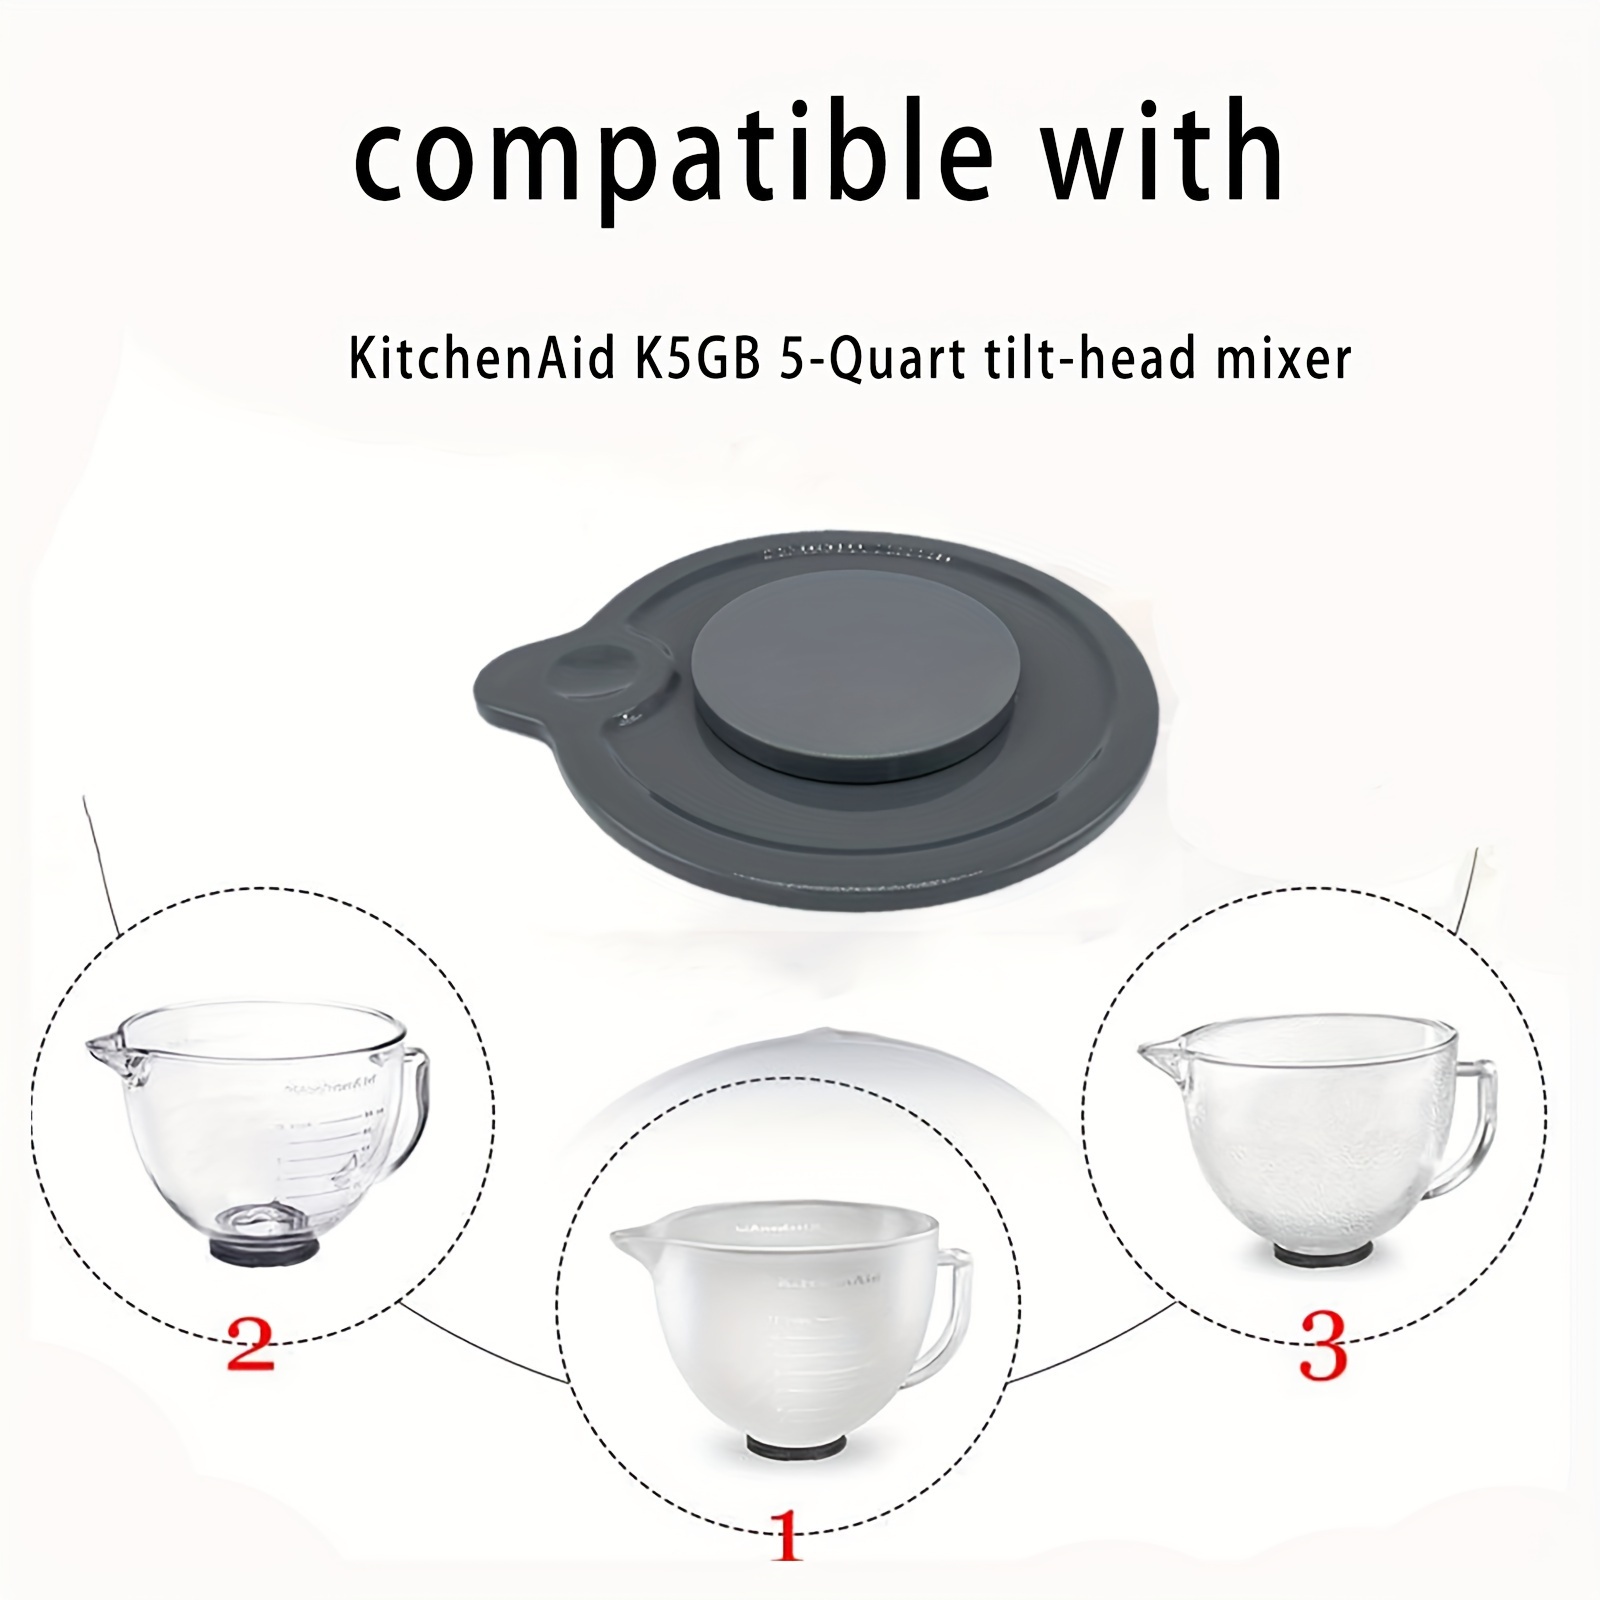  Mixer Bowl Covers for KitchenAid 4.5-5 Qt Tilt-Head Stand Mixer,  Splash Guard with Extra Pouring Window for KitchenAid Mixer, Bowl Lid to  Prevent Spilling of Ingredients(Pack of 2): Home & Kitchen